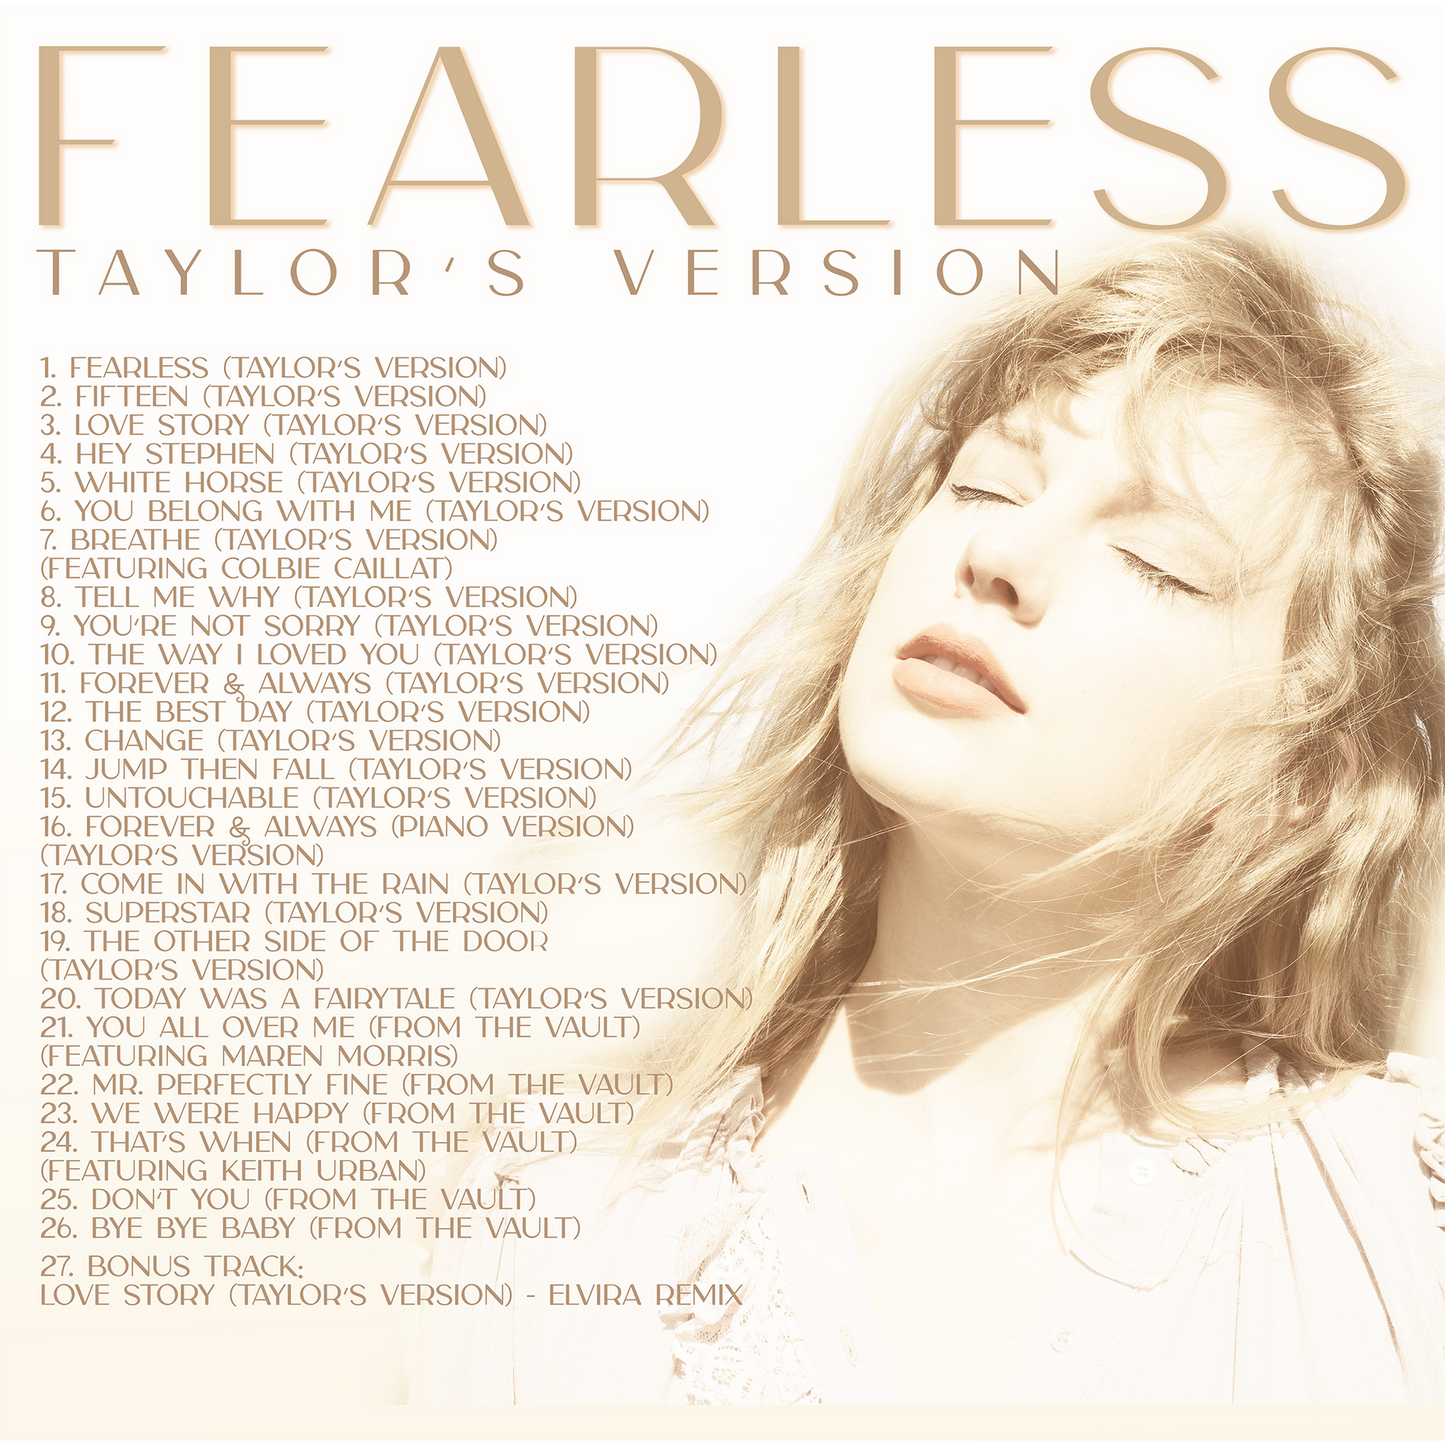 Taylor Swift - Fearless (Taylor's Version) 3LP